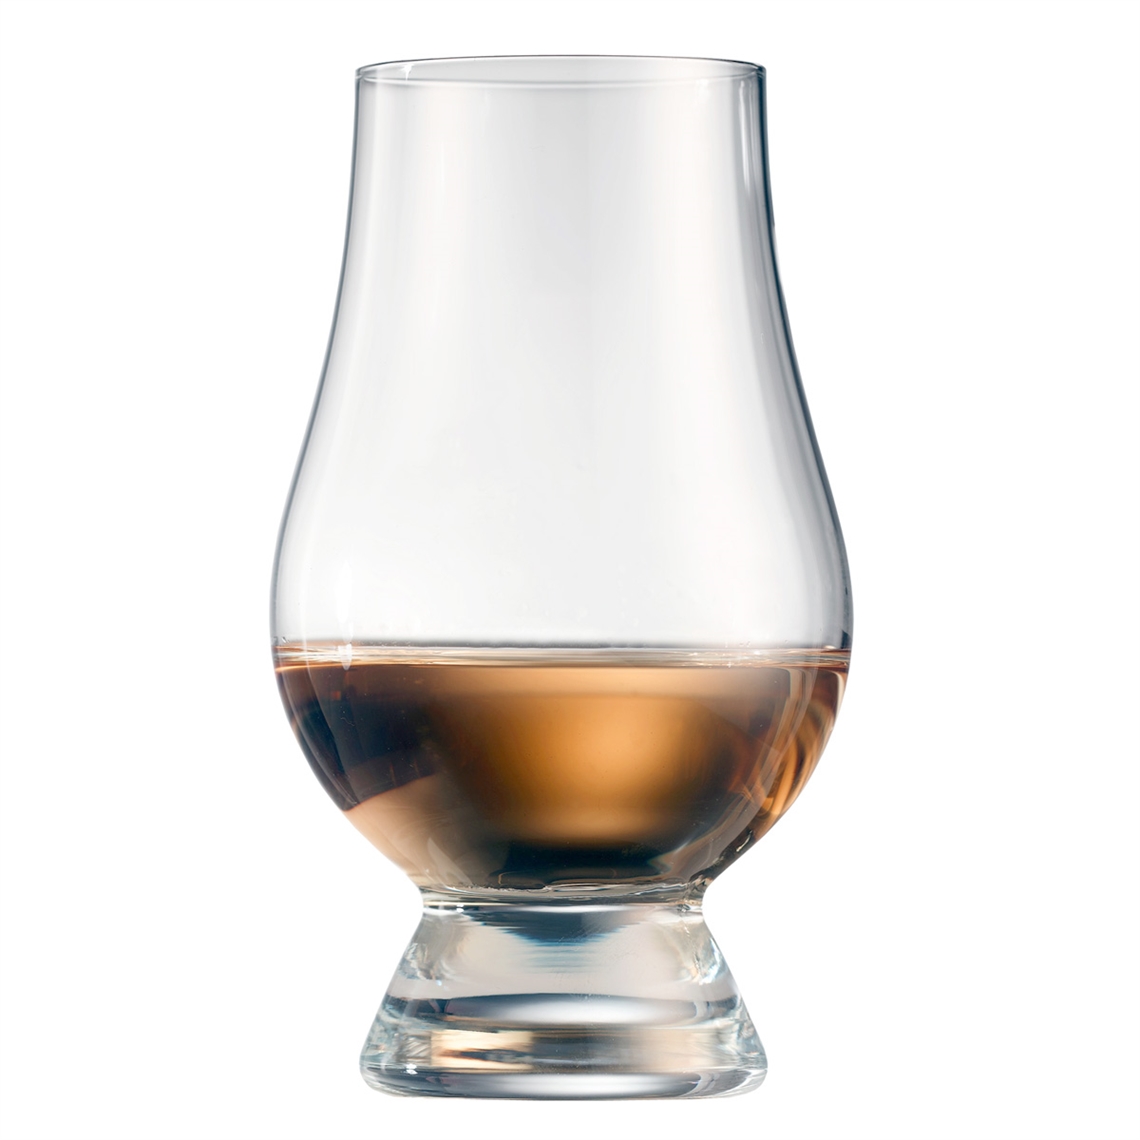 View more spiegelau from our Whisky Glasses range